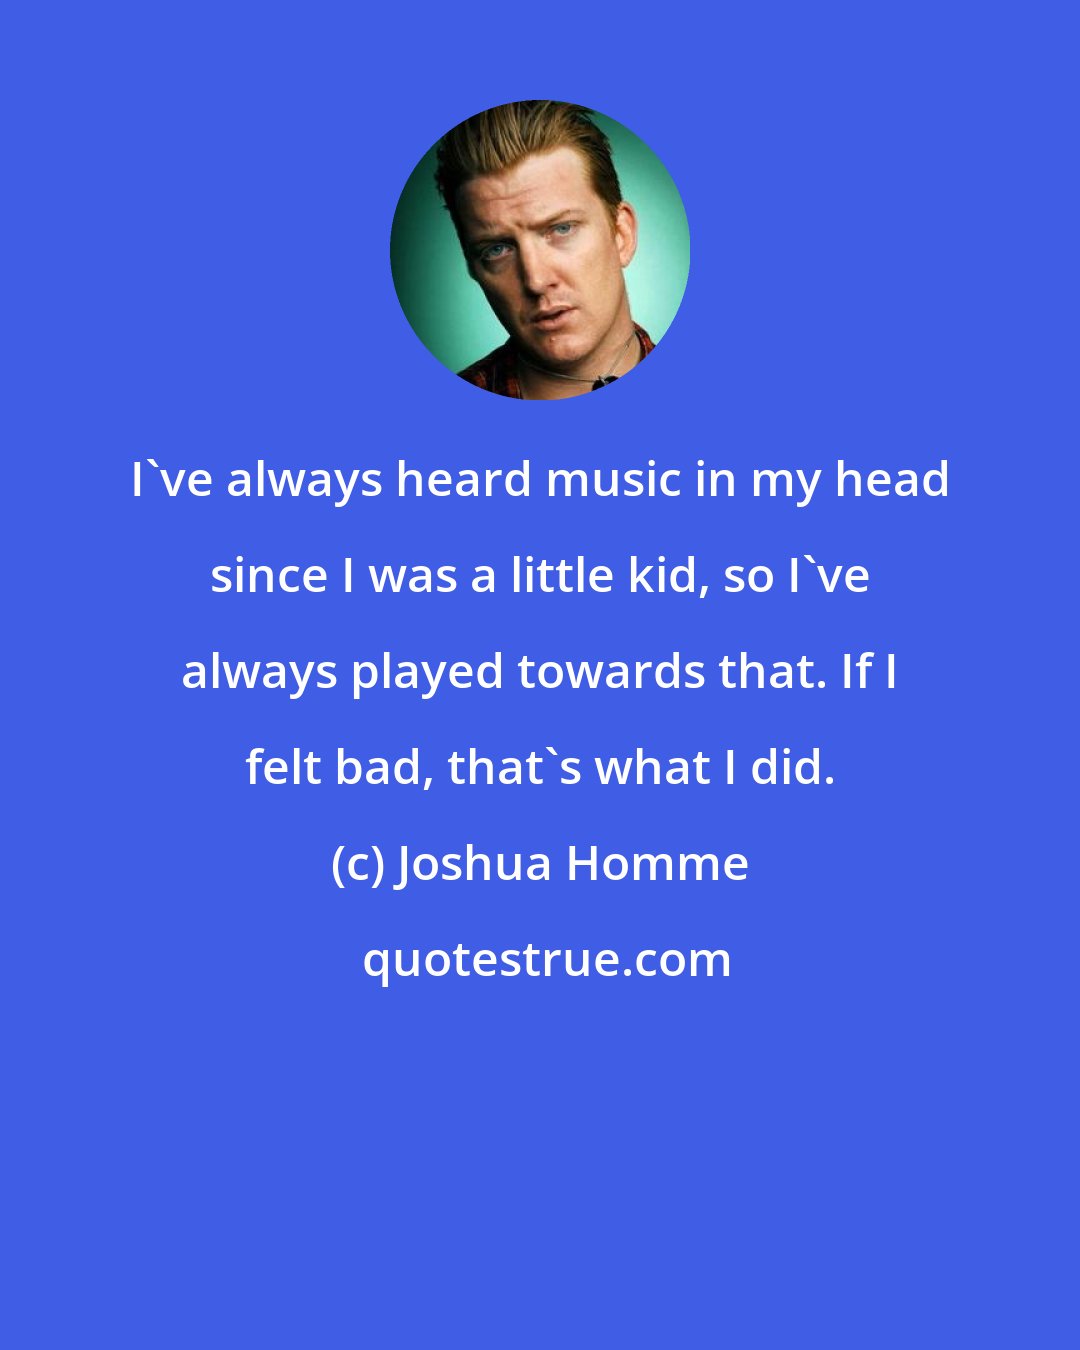 Joshua Homme: I've always heard music in my head since I was a little kid, so I've always played towards that. If I felt bad, that's what I did.